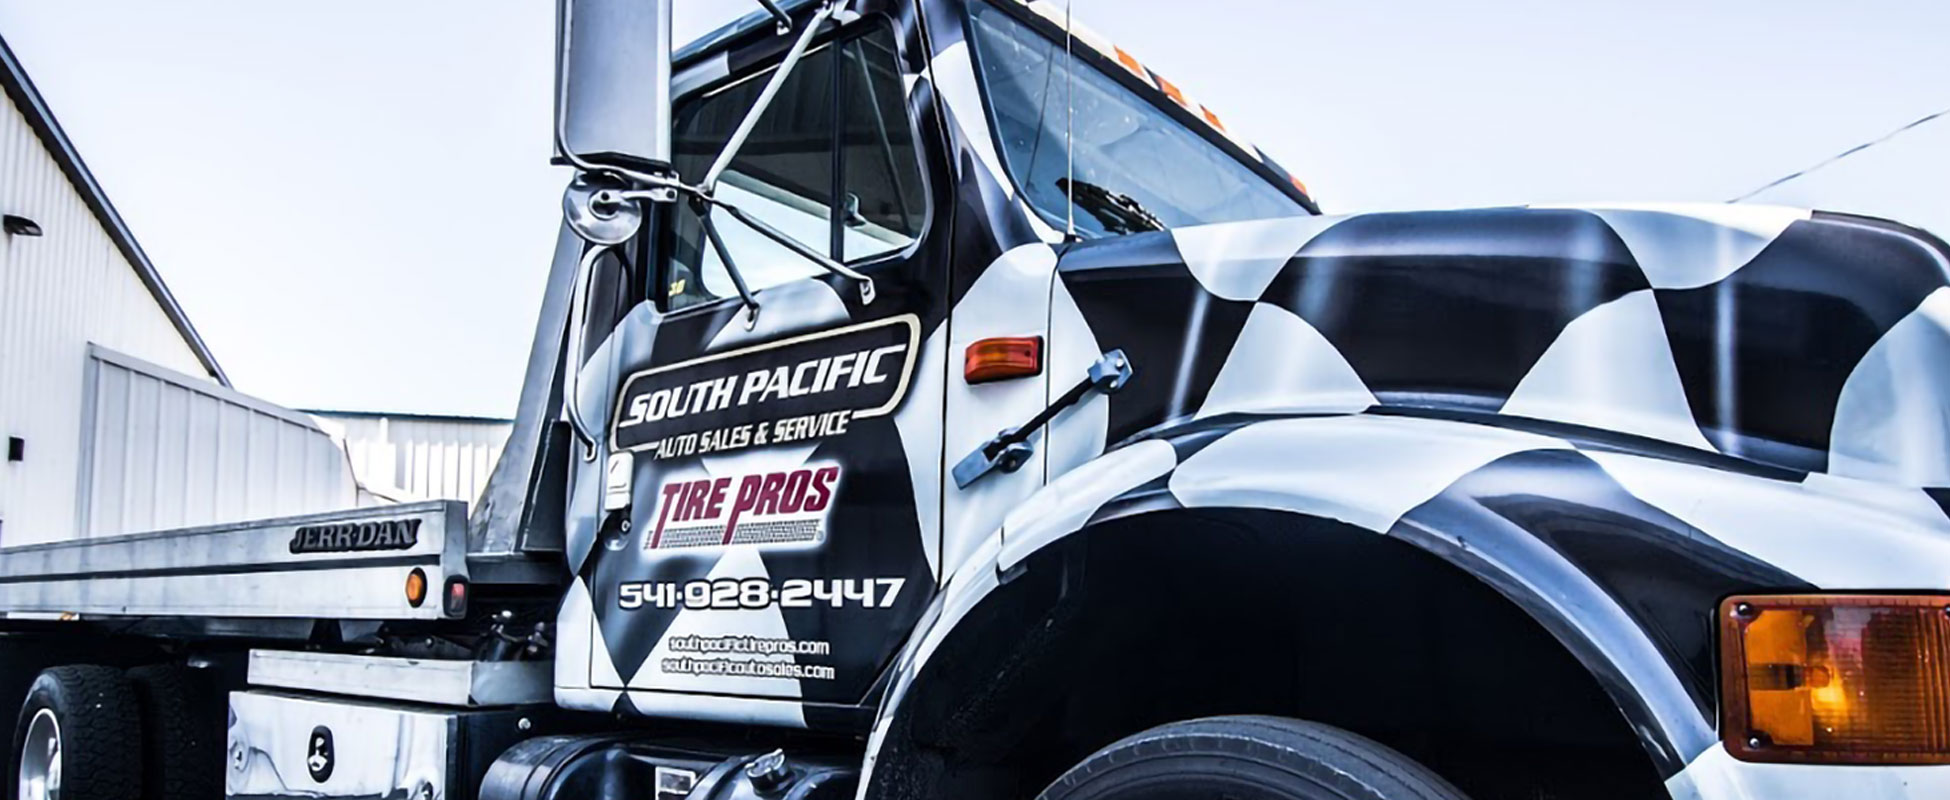 South Pacific Tire Pros banner